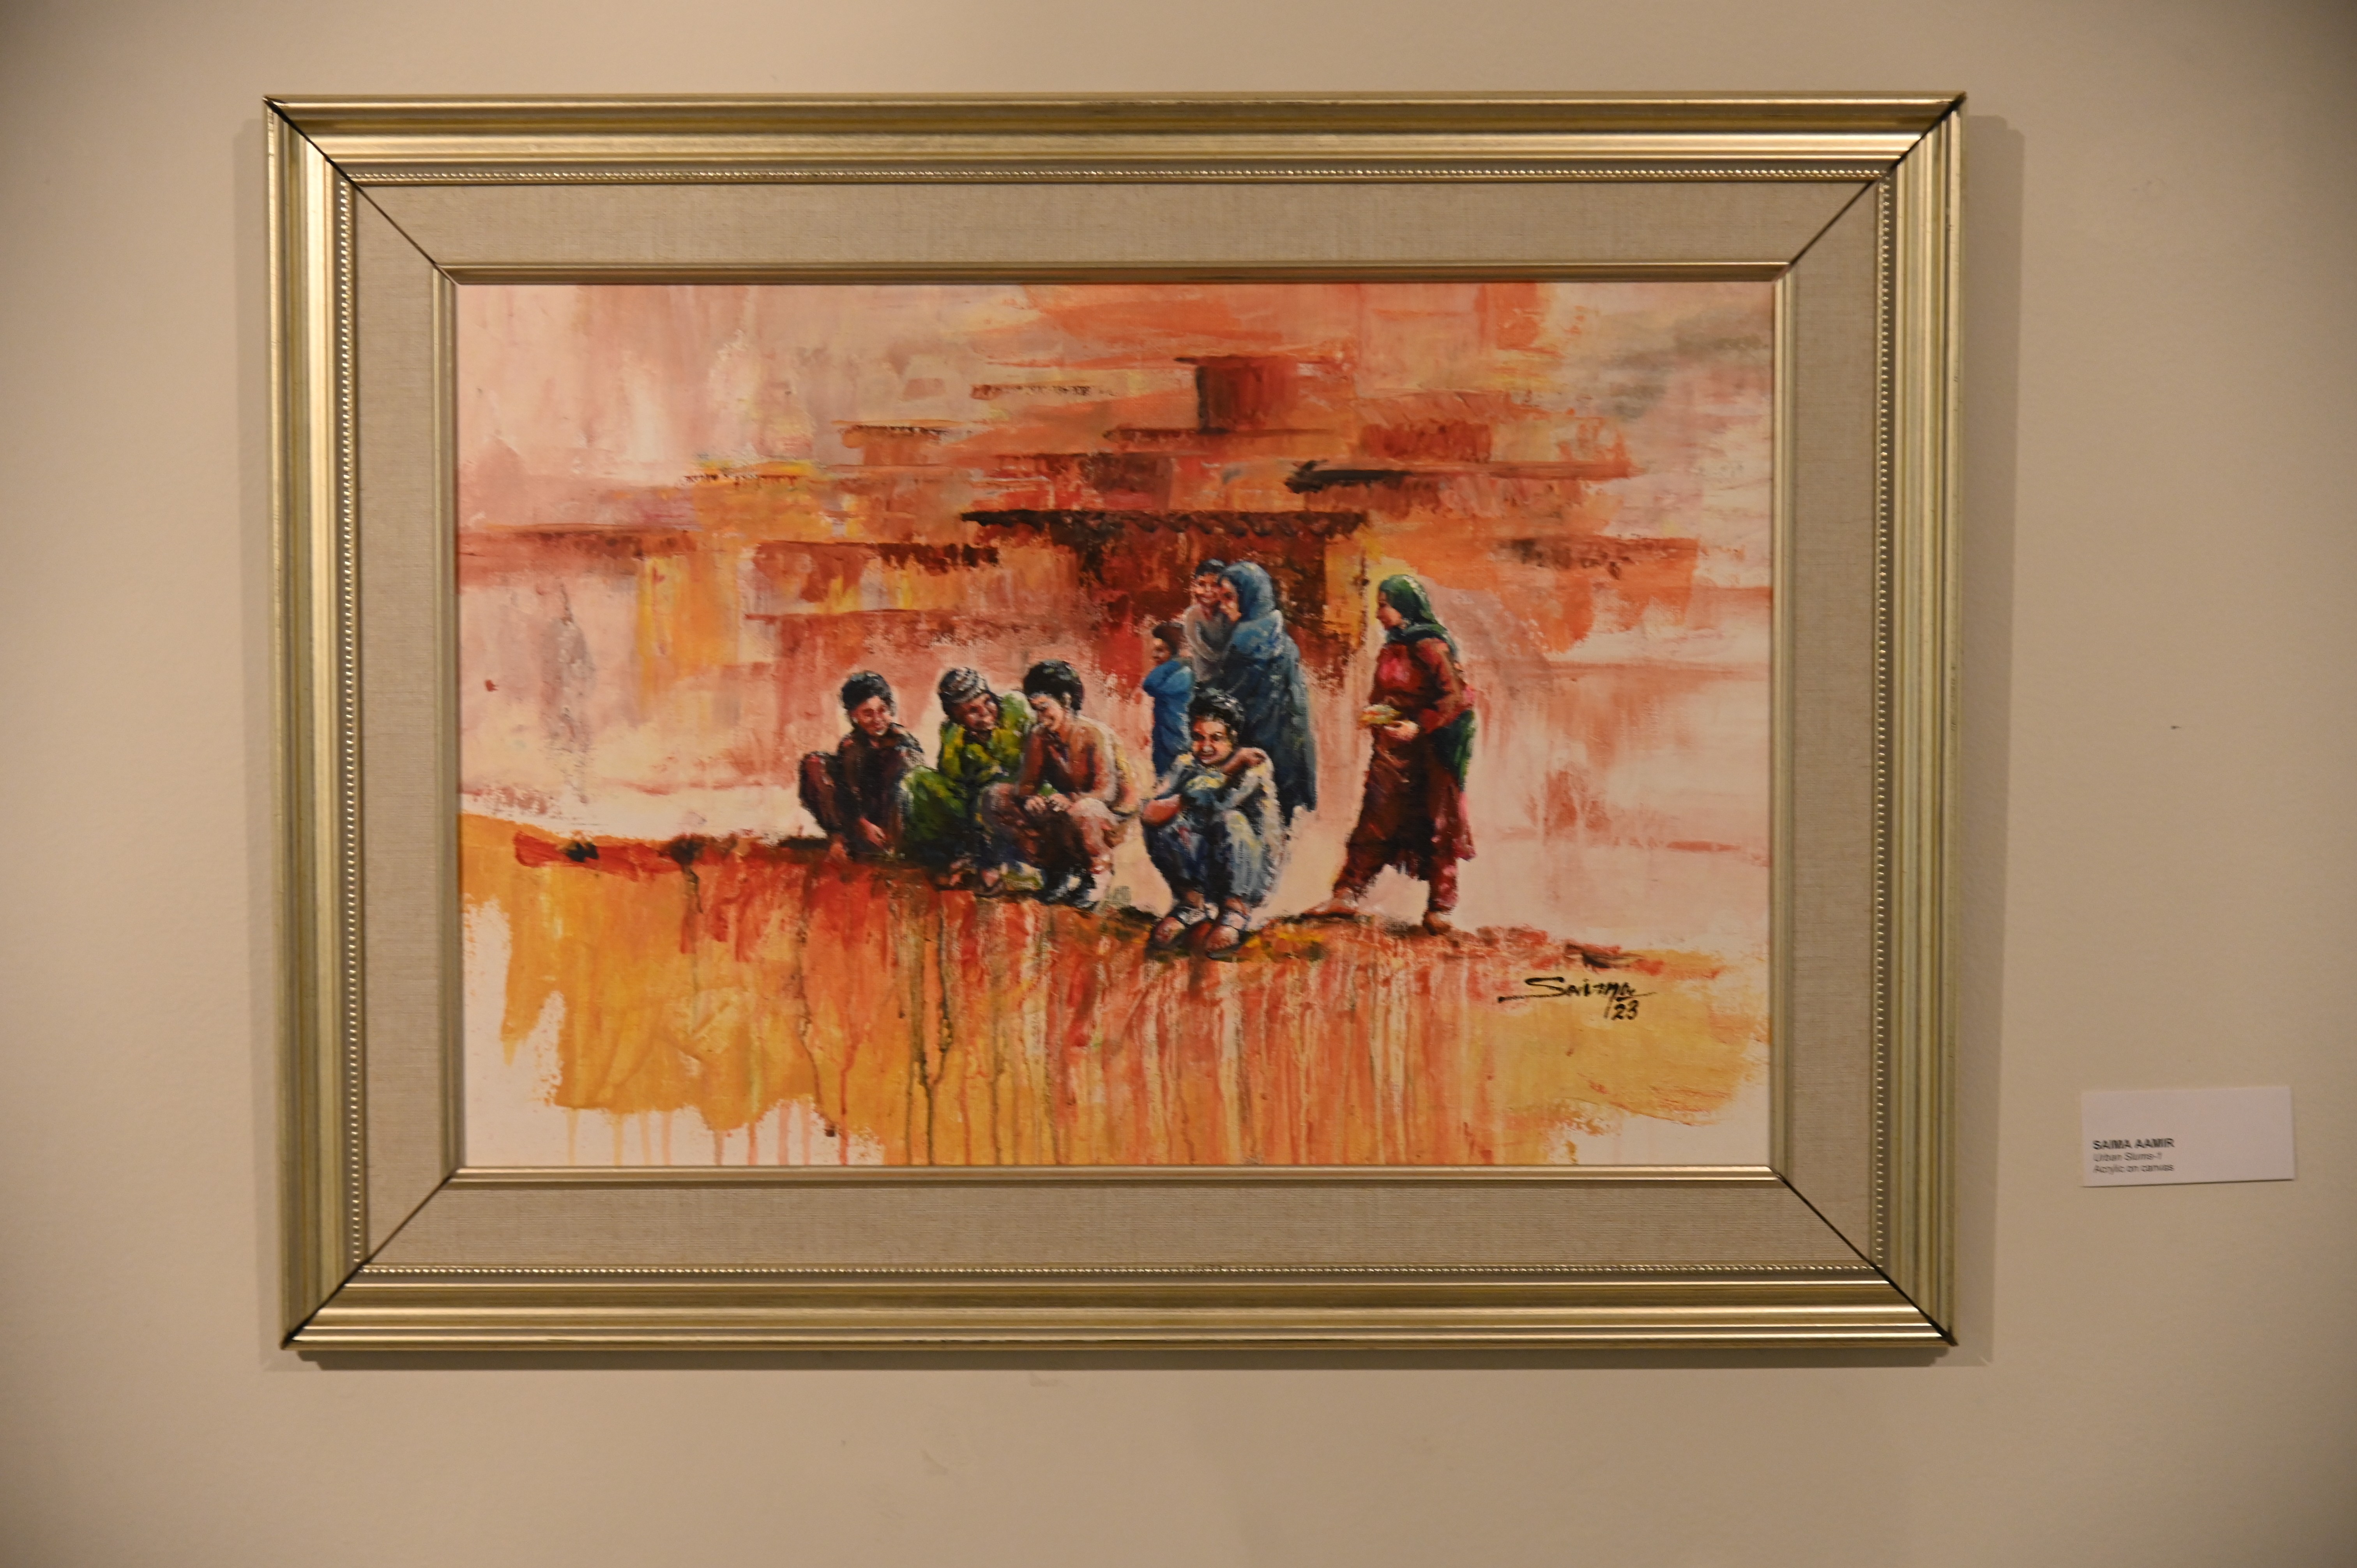 The painting showing the Urban Slum area